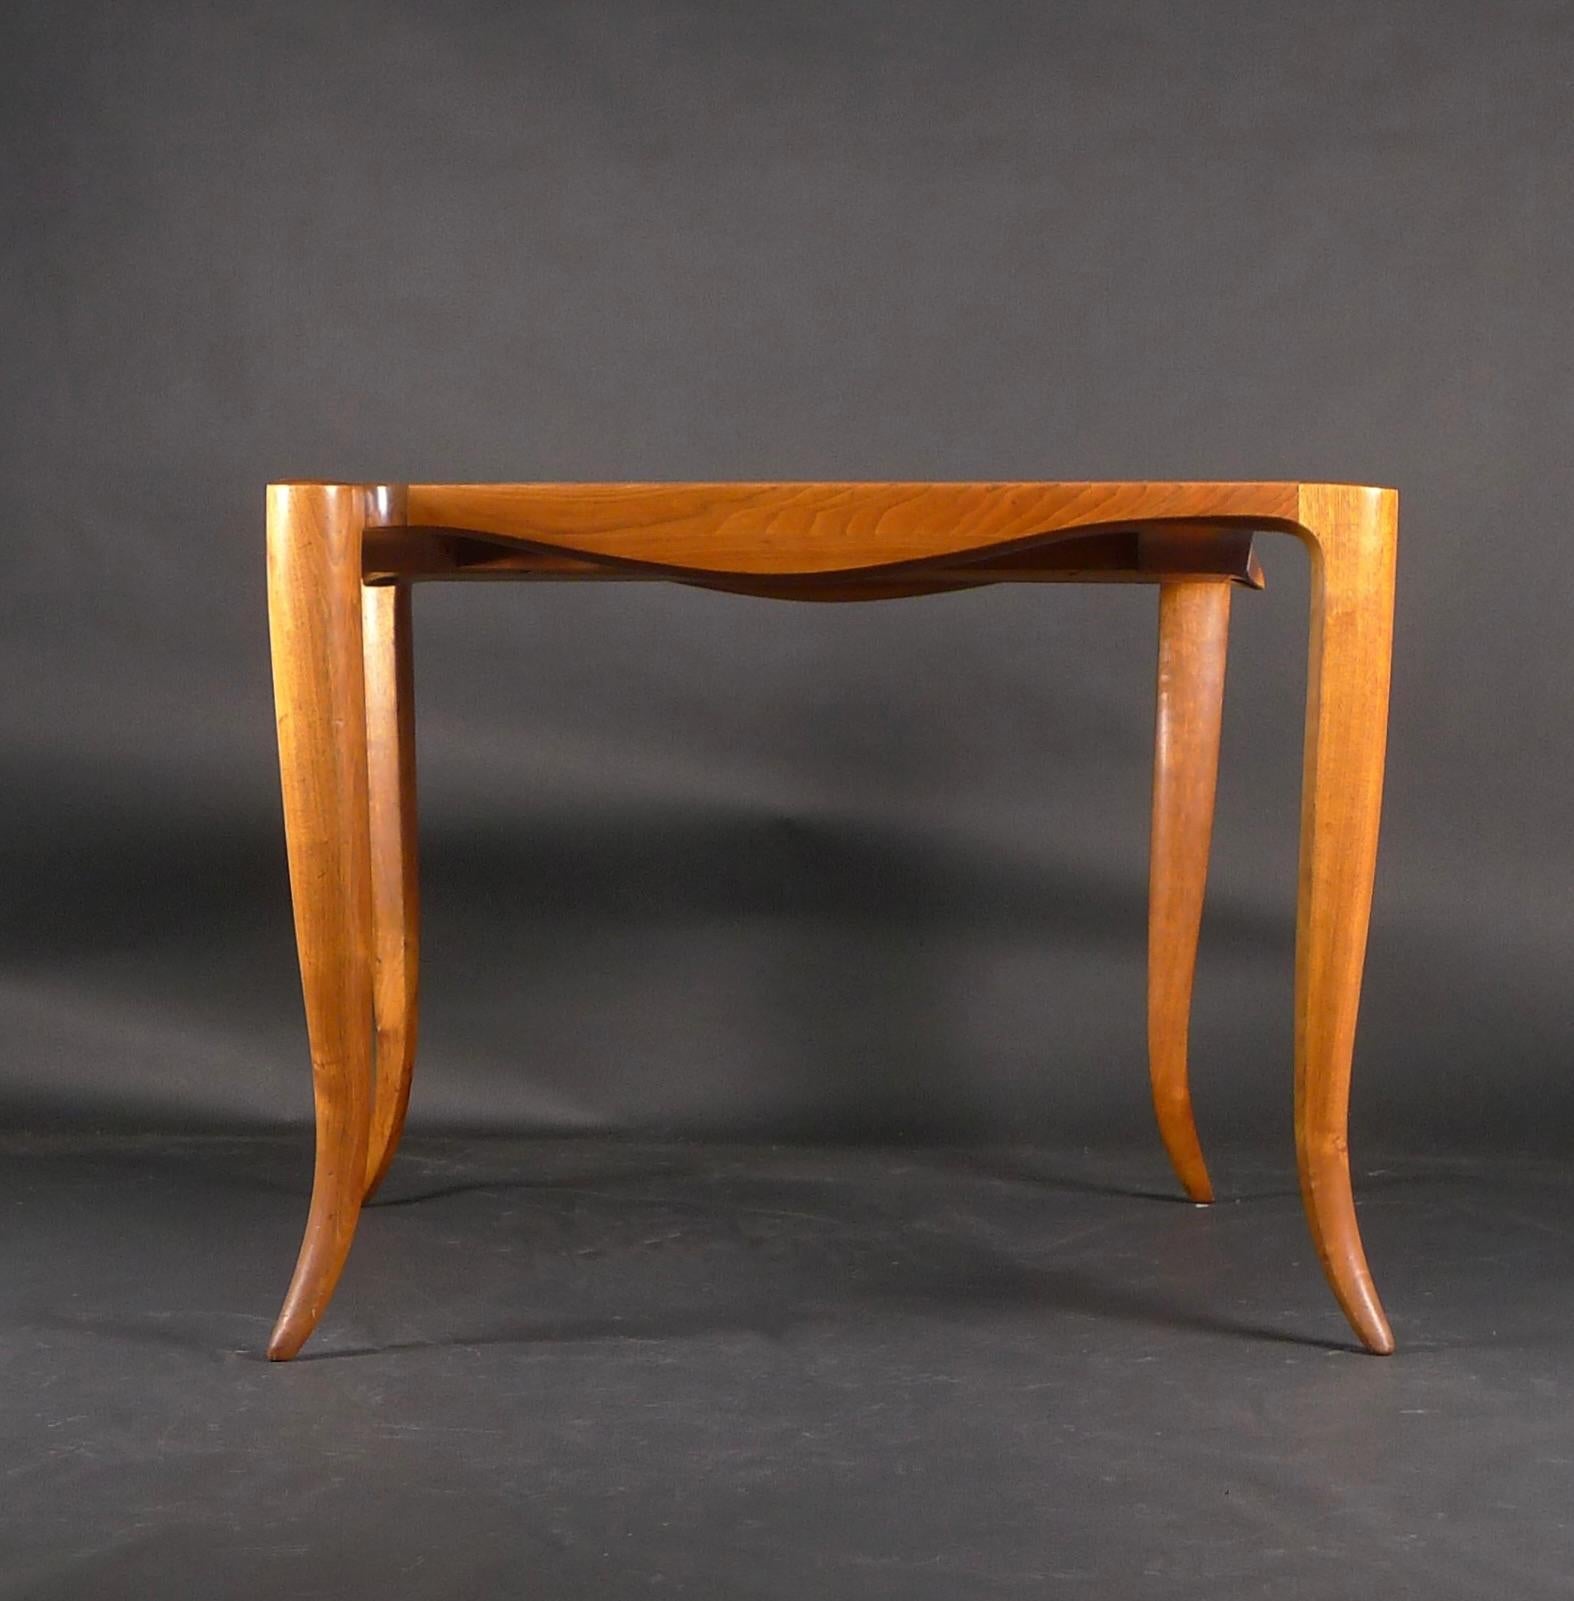 Wendell Castle (1932-2018), Games Table, Walnut & Curly Maple, initialled & dated 1974

This is a rare design, which is illustrated in the catalogue raisonée (see below).

The table is constructed in walnut with a stunning curly maple inset top,